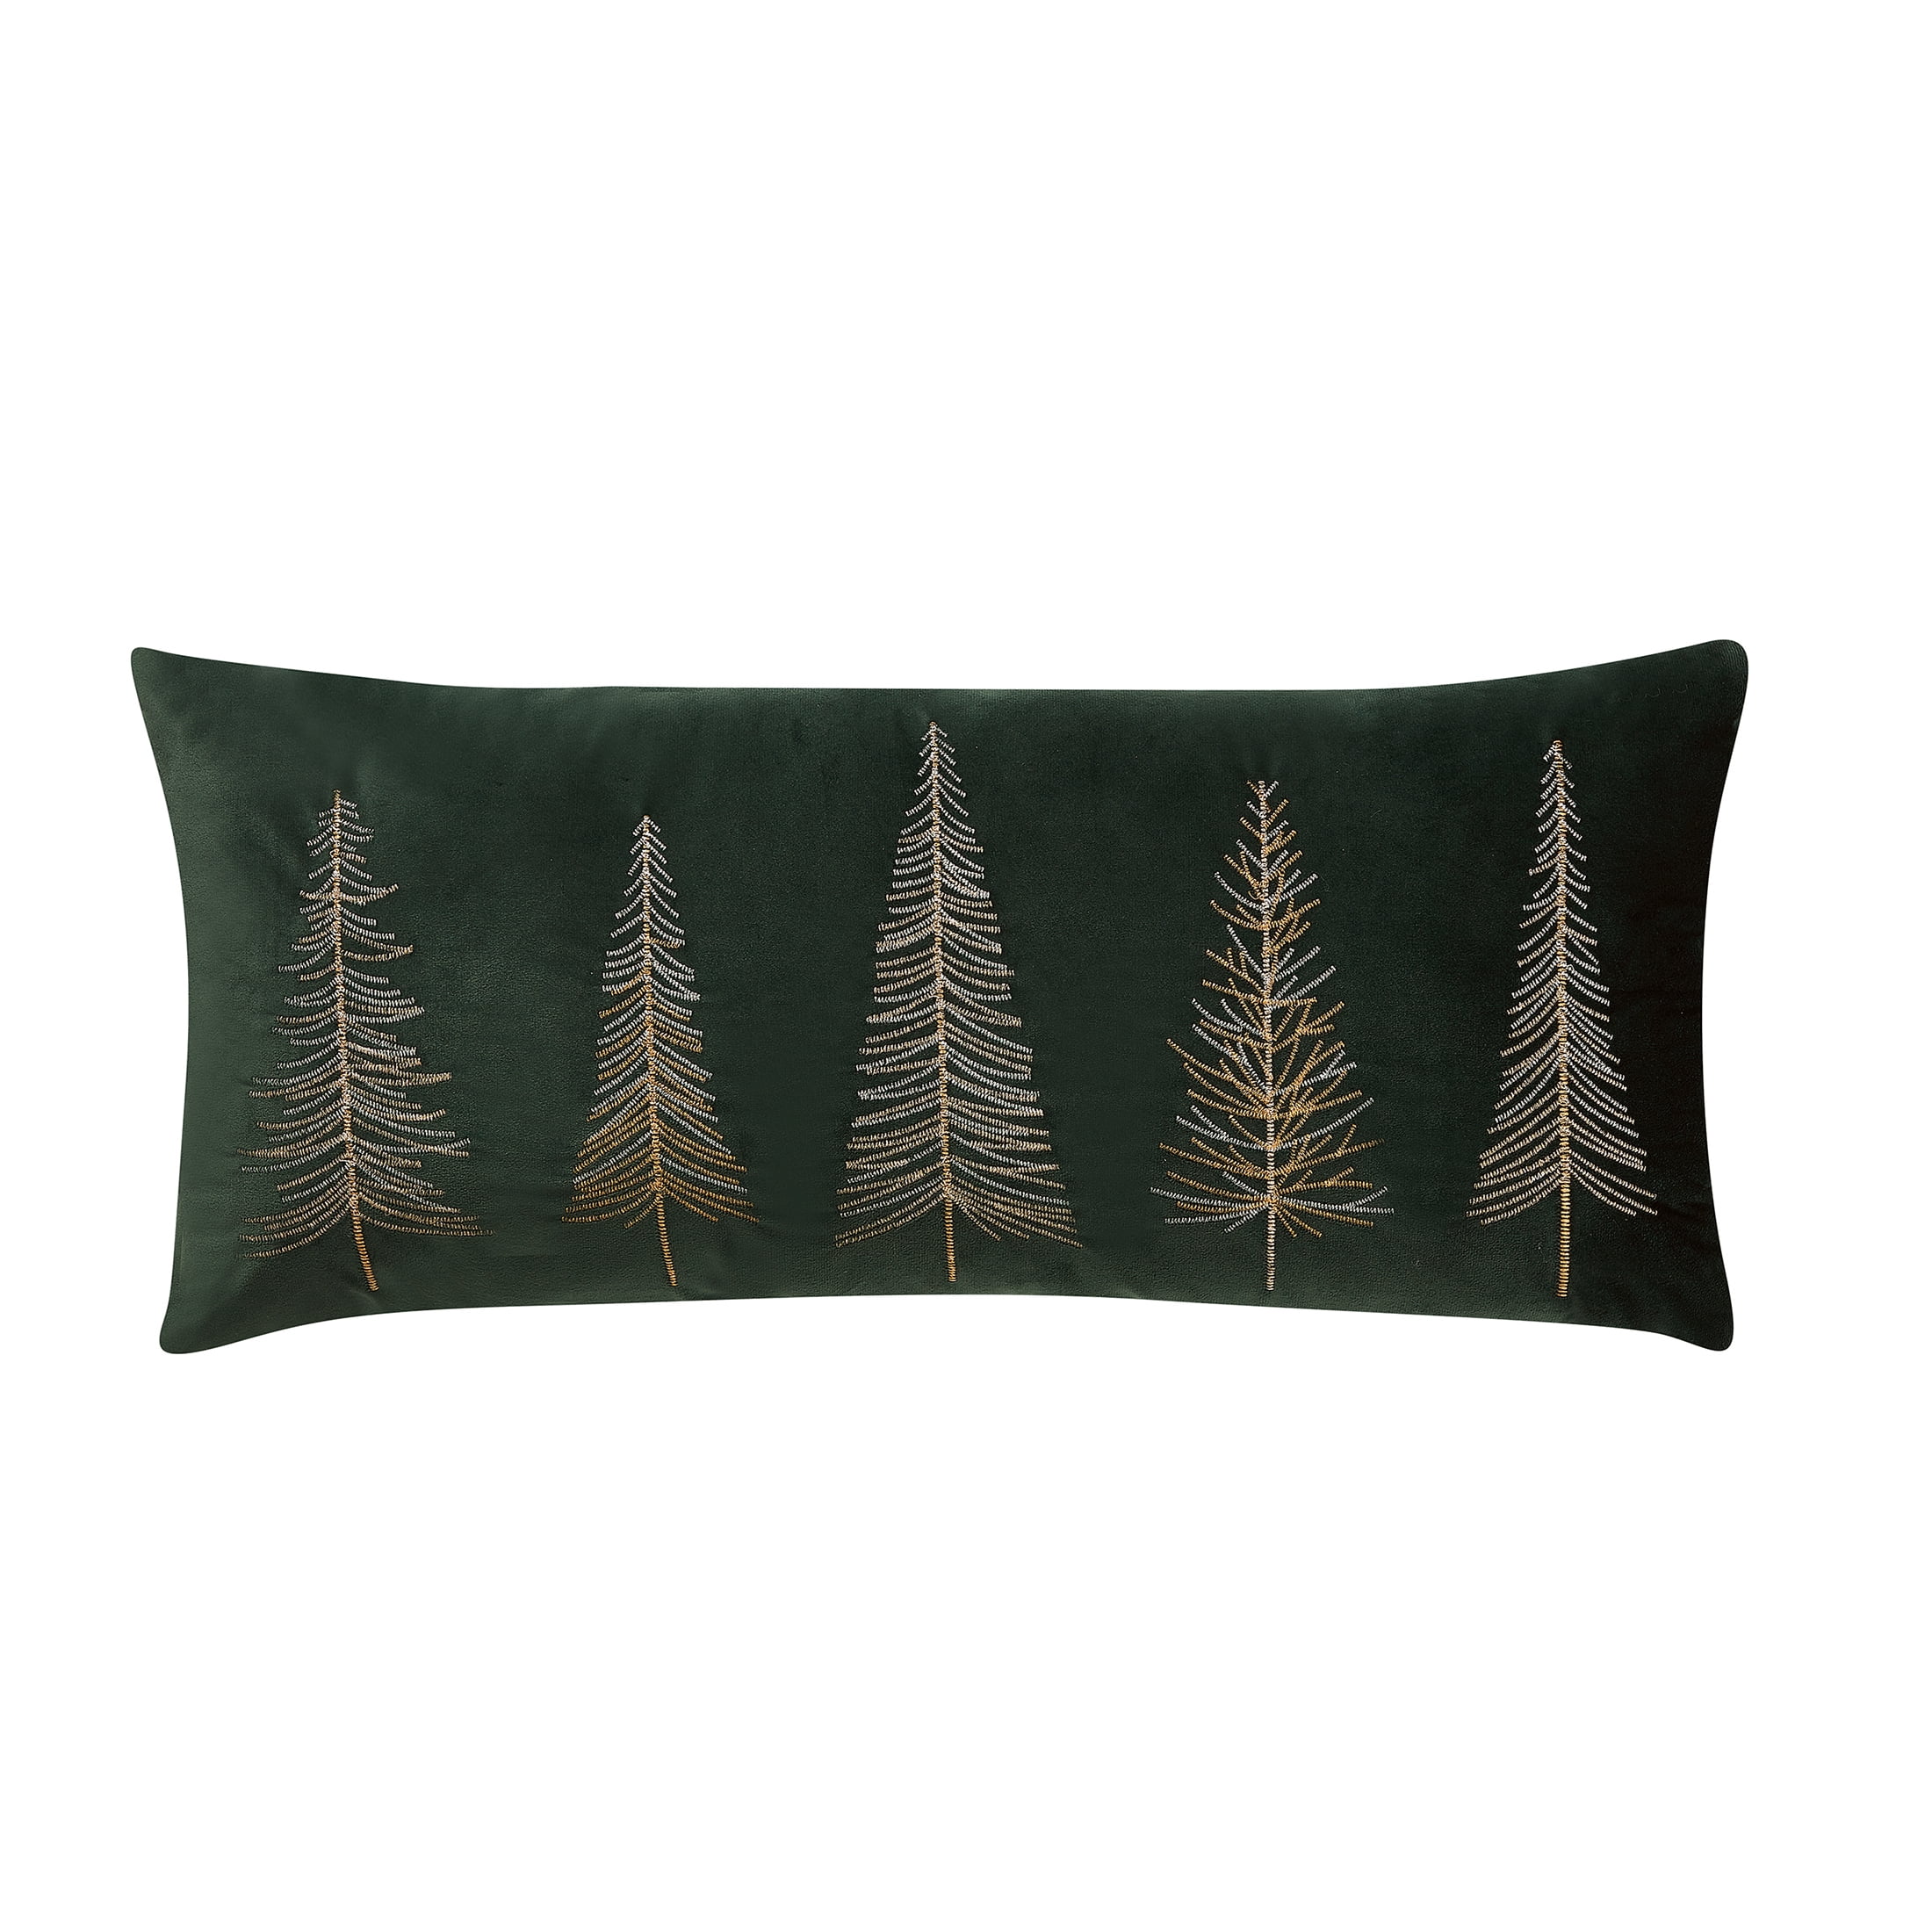 My Texas House Holiday Tree 12" x 28" Green Velvet Decorative Pillow Cover